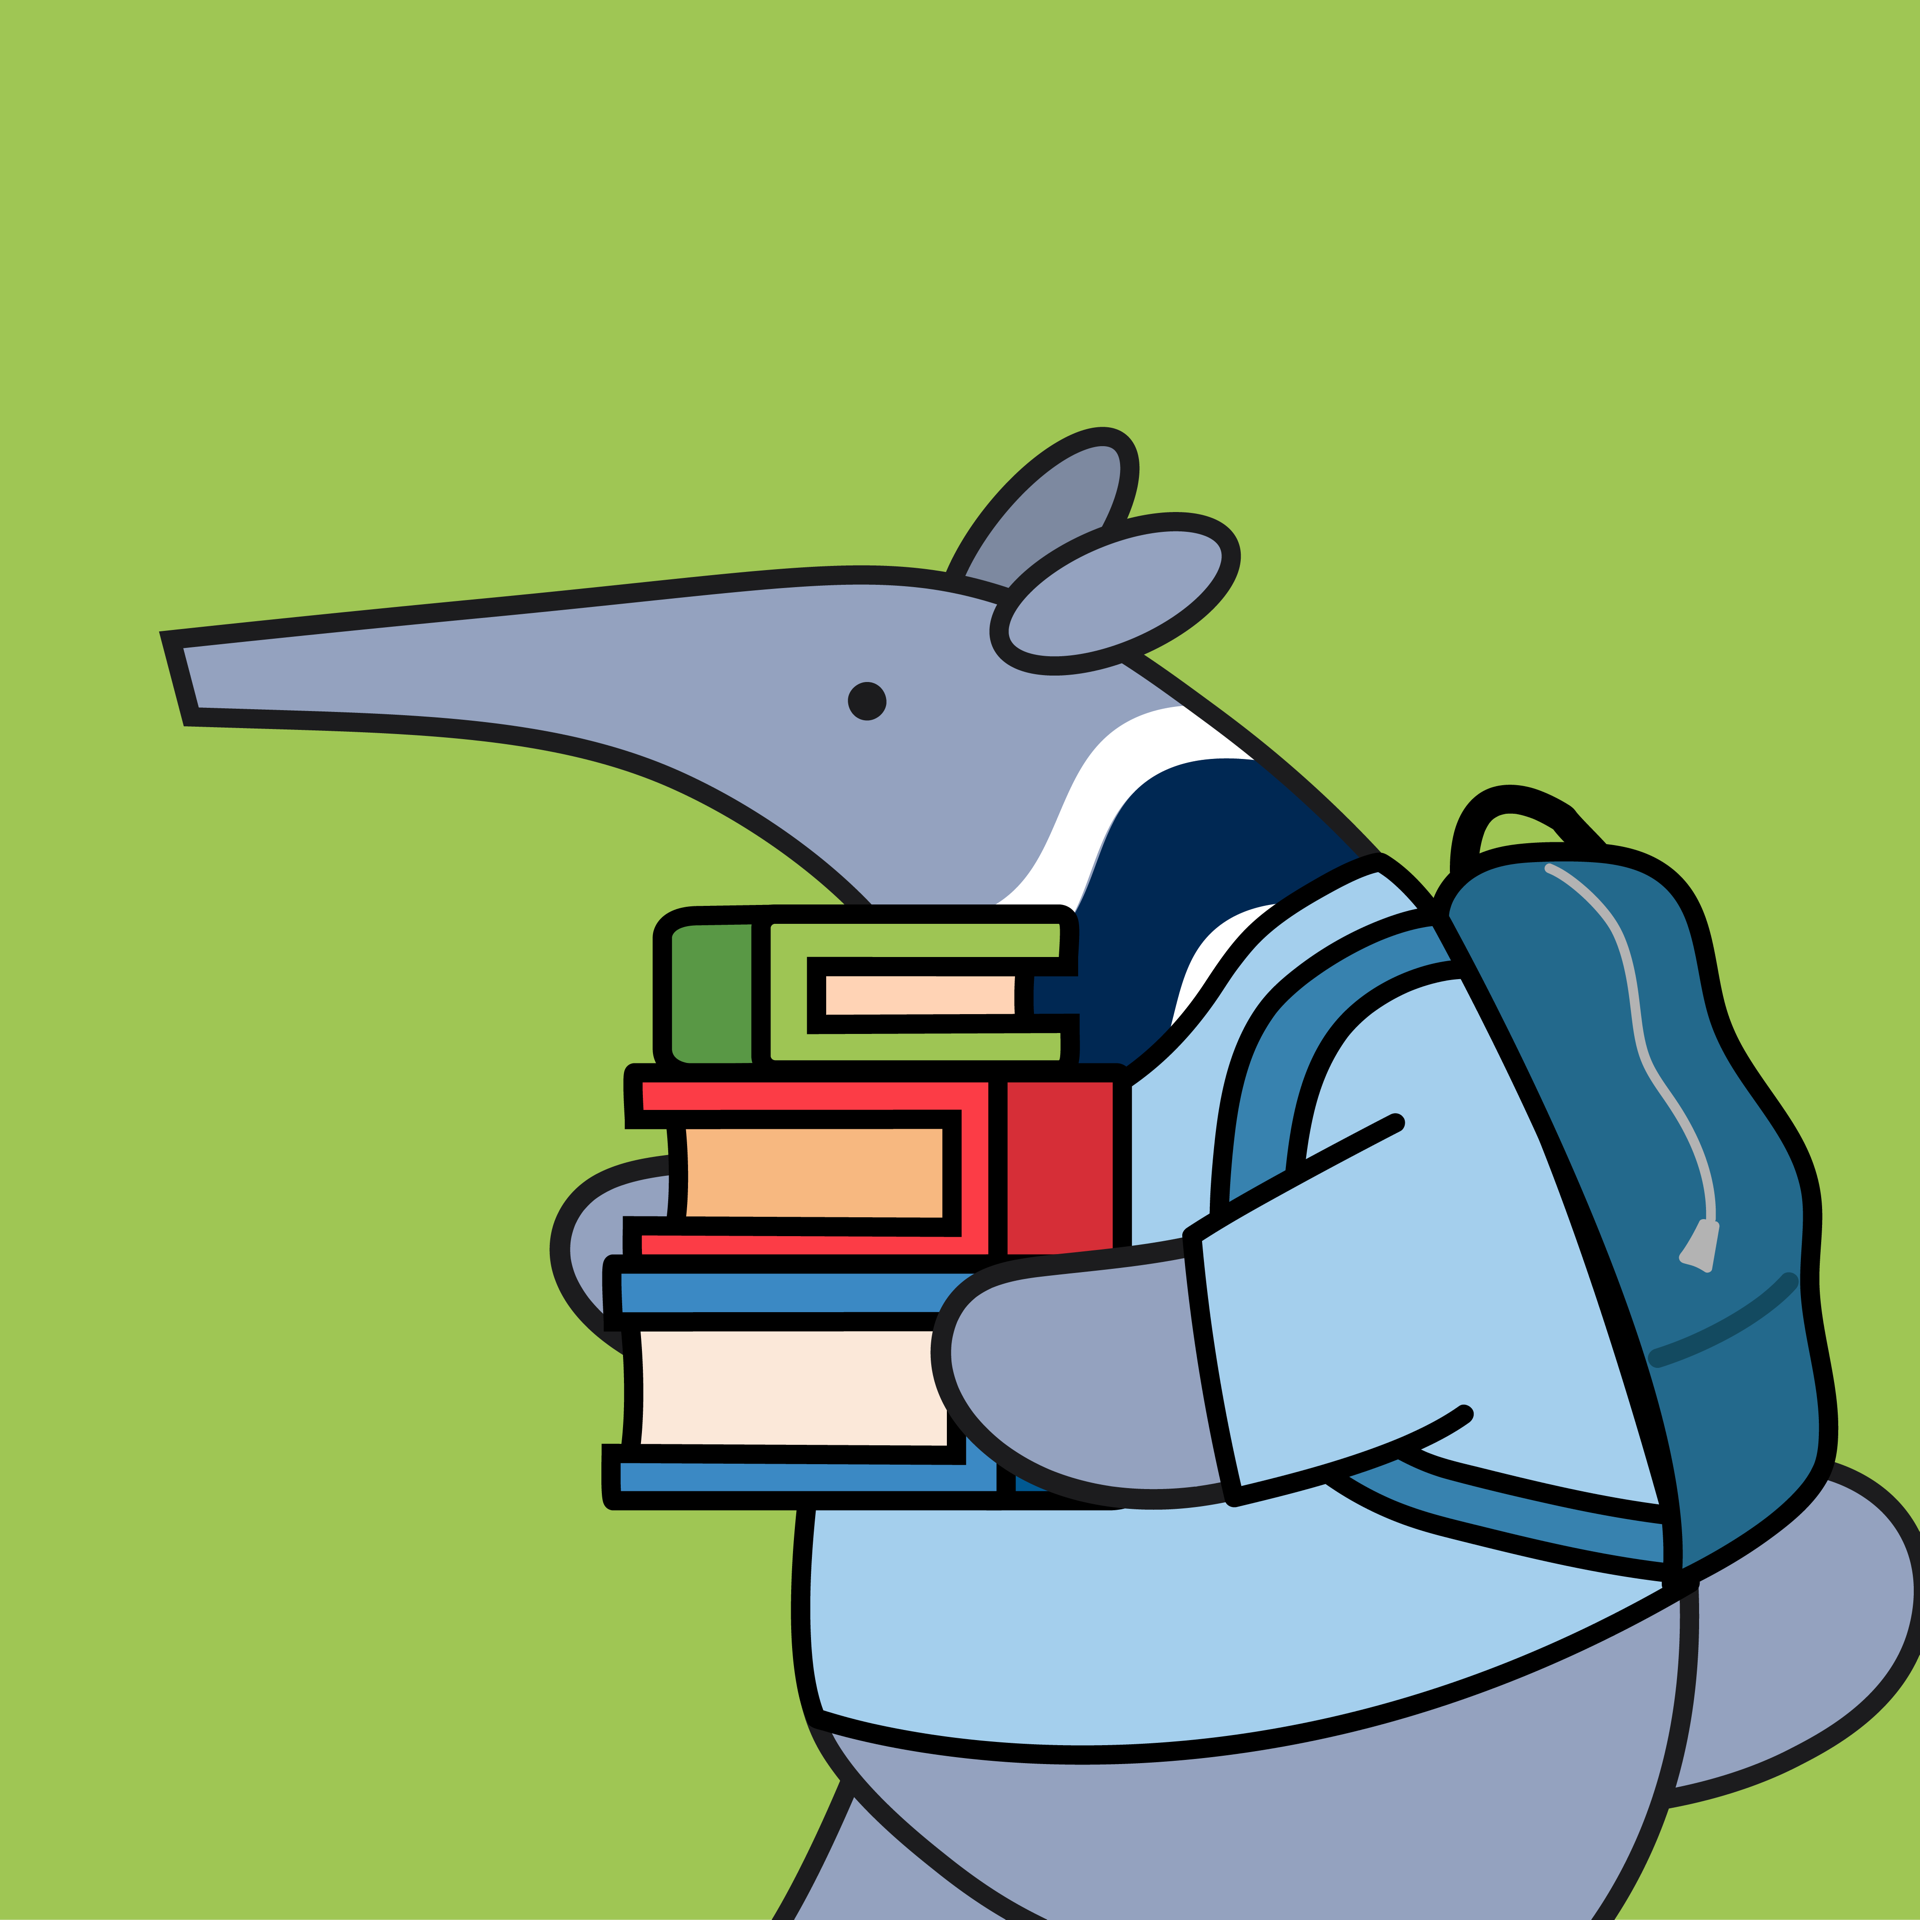 An anteater holding books